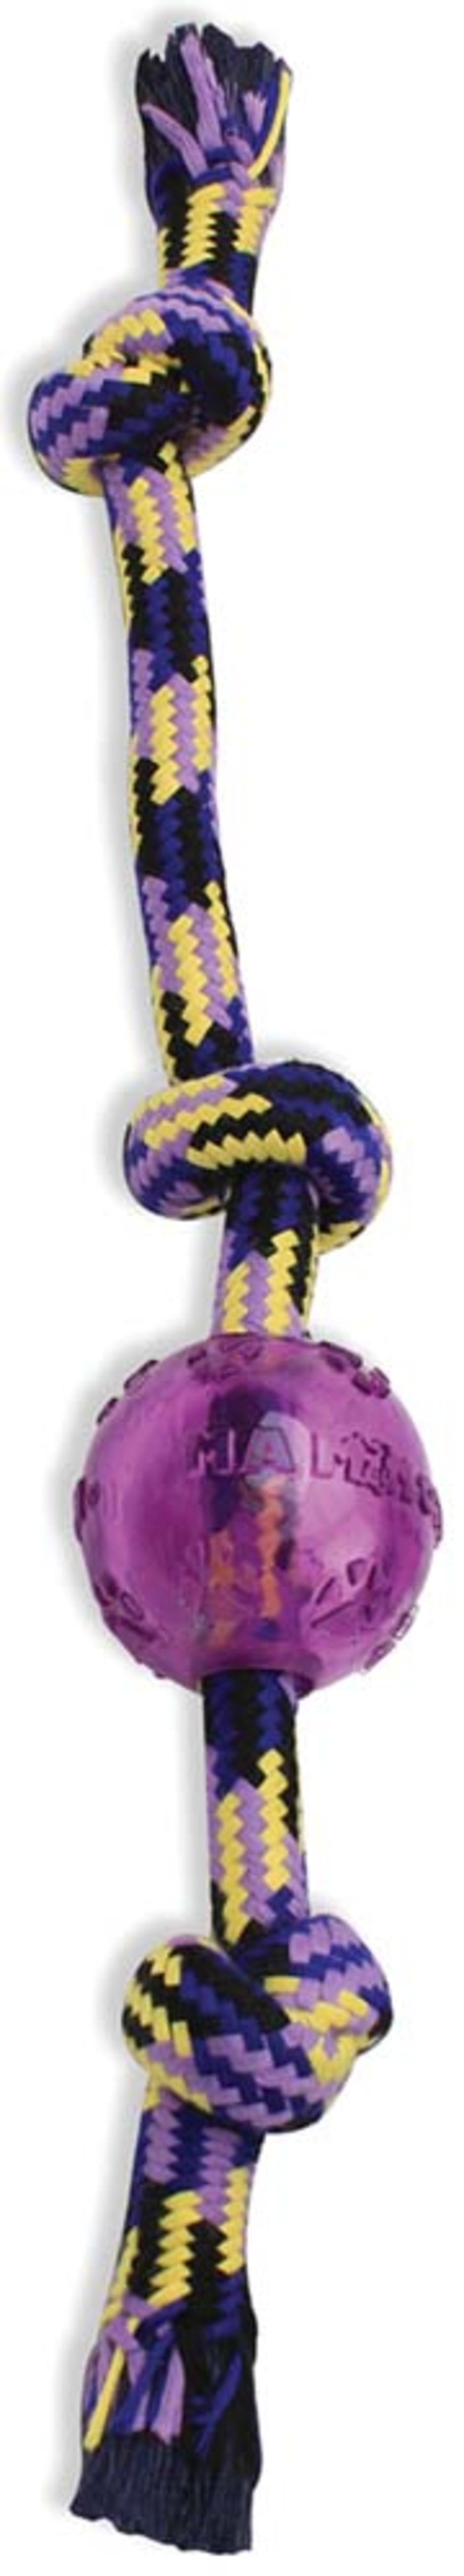 Mammoth Pet Products Braidys Tug with TPR Ball Dog Toy Assorted, 20 in, LG